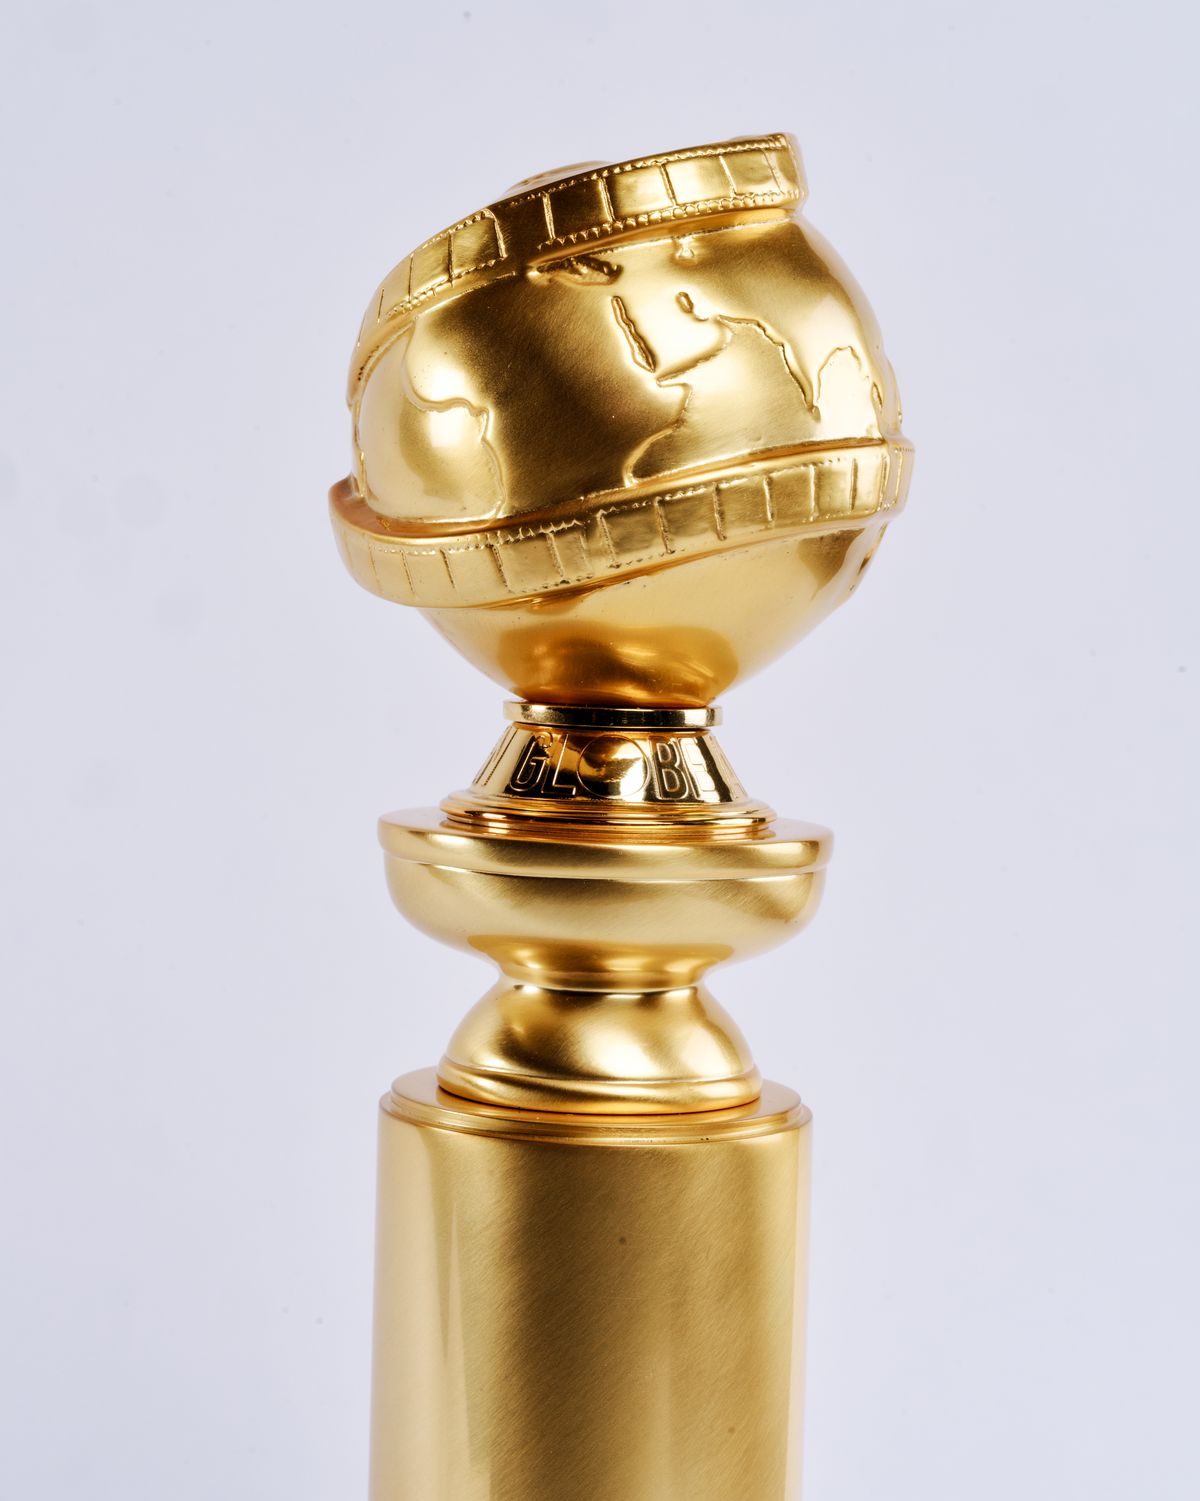 81st Golden Globe Awards Nominations Announcements